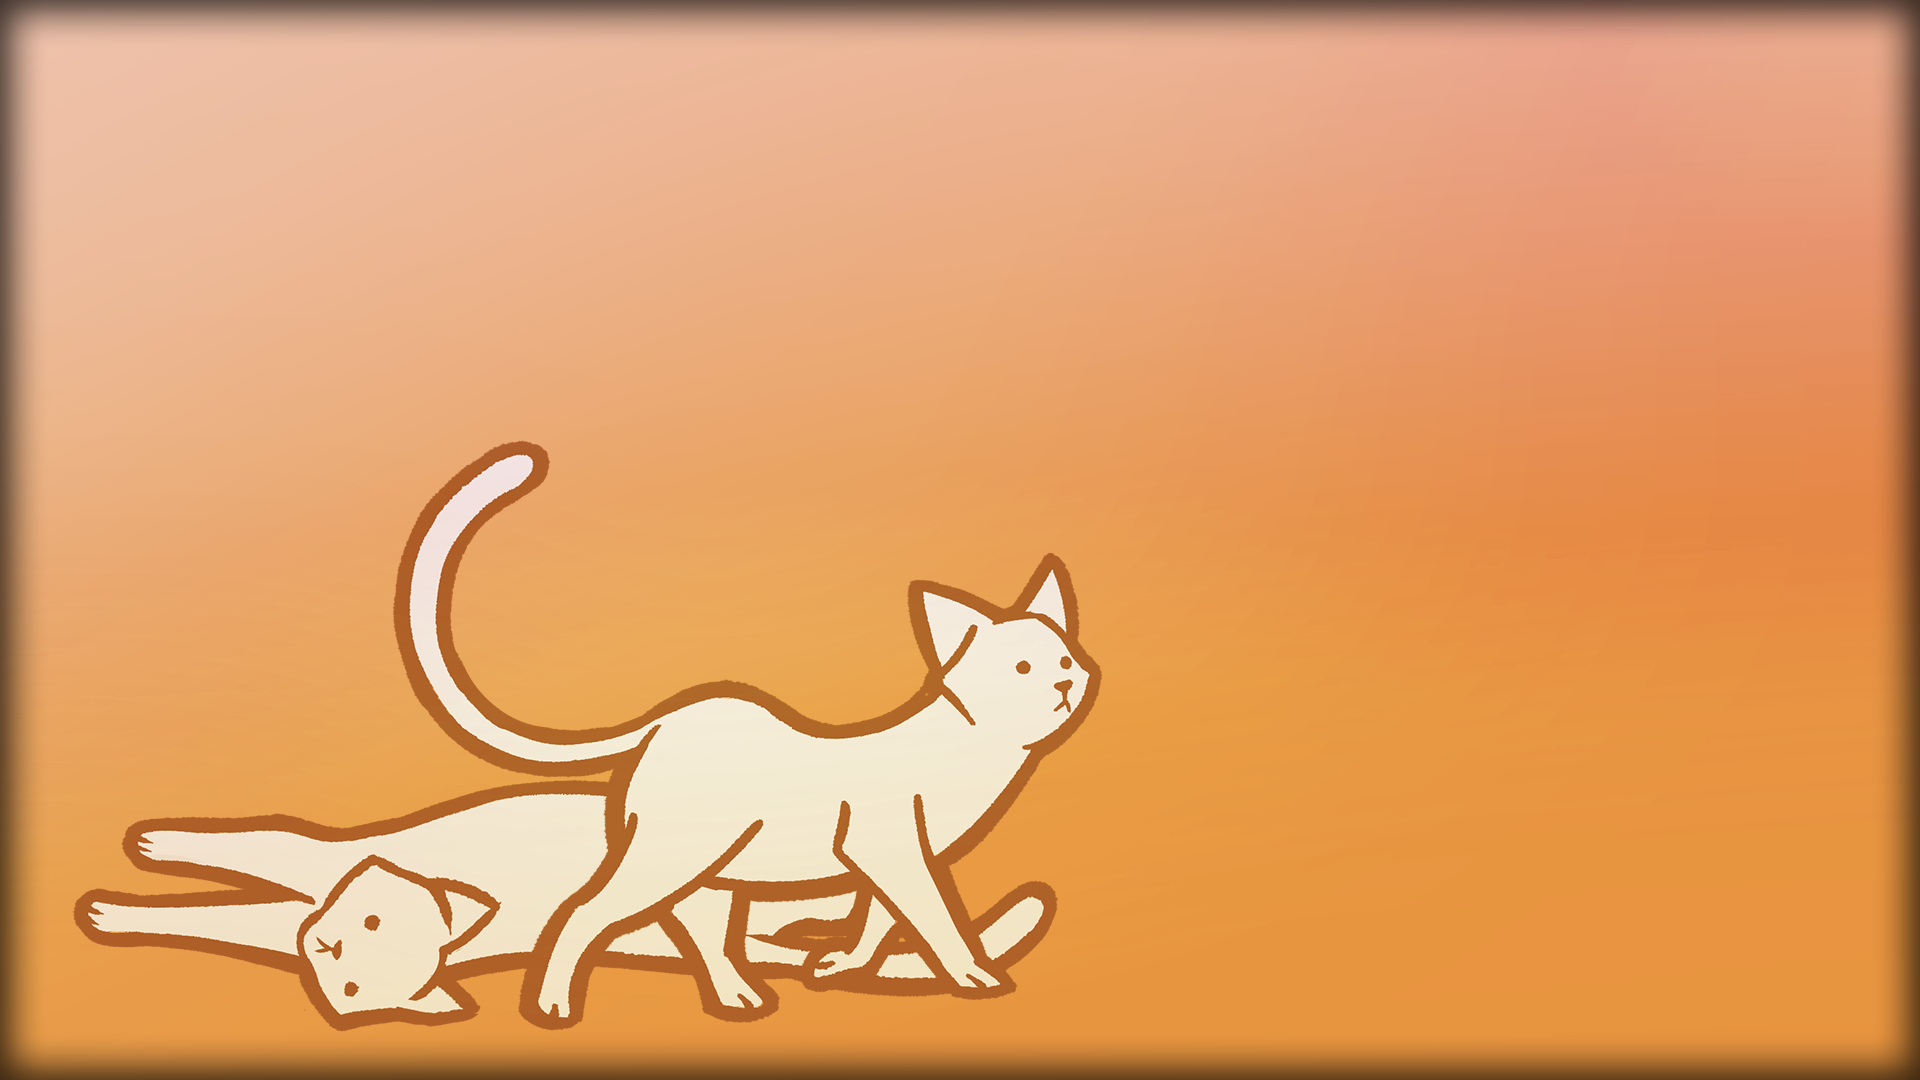 Icon for Found 120 cats